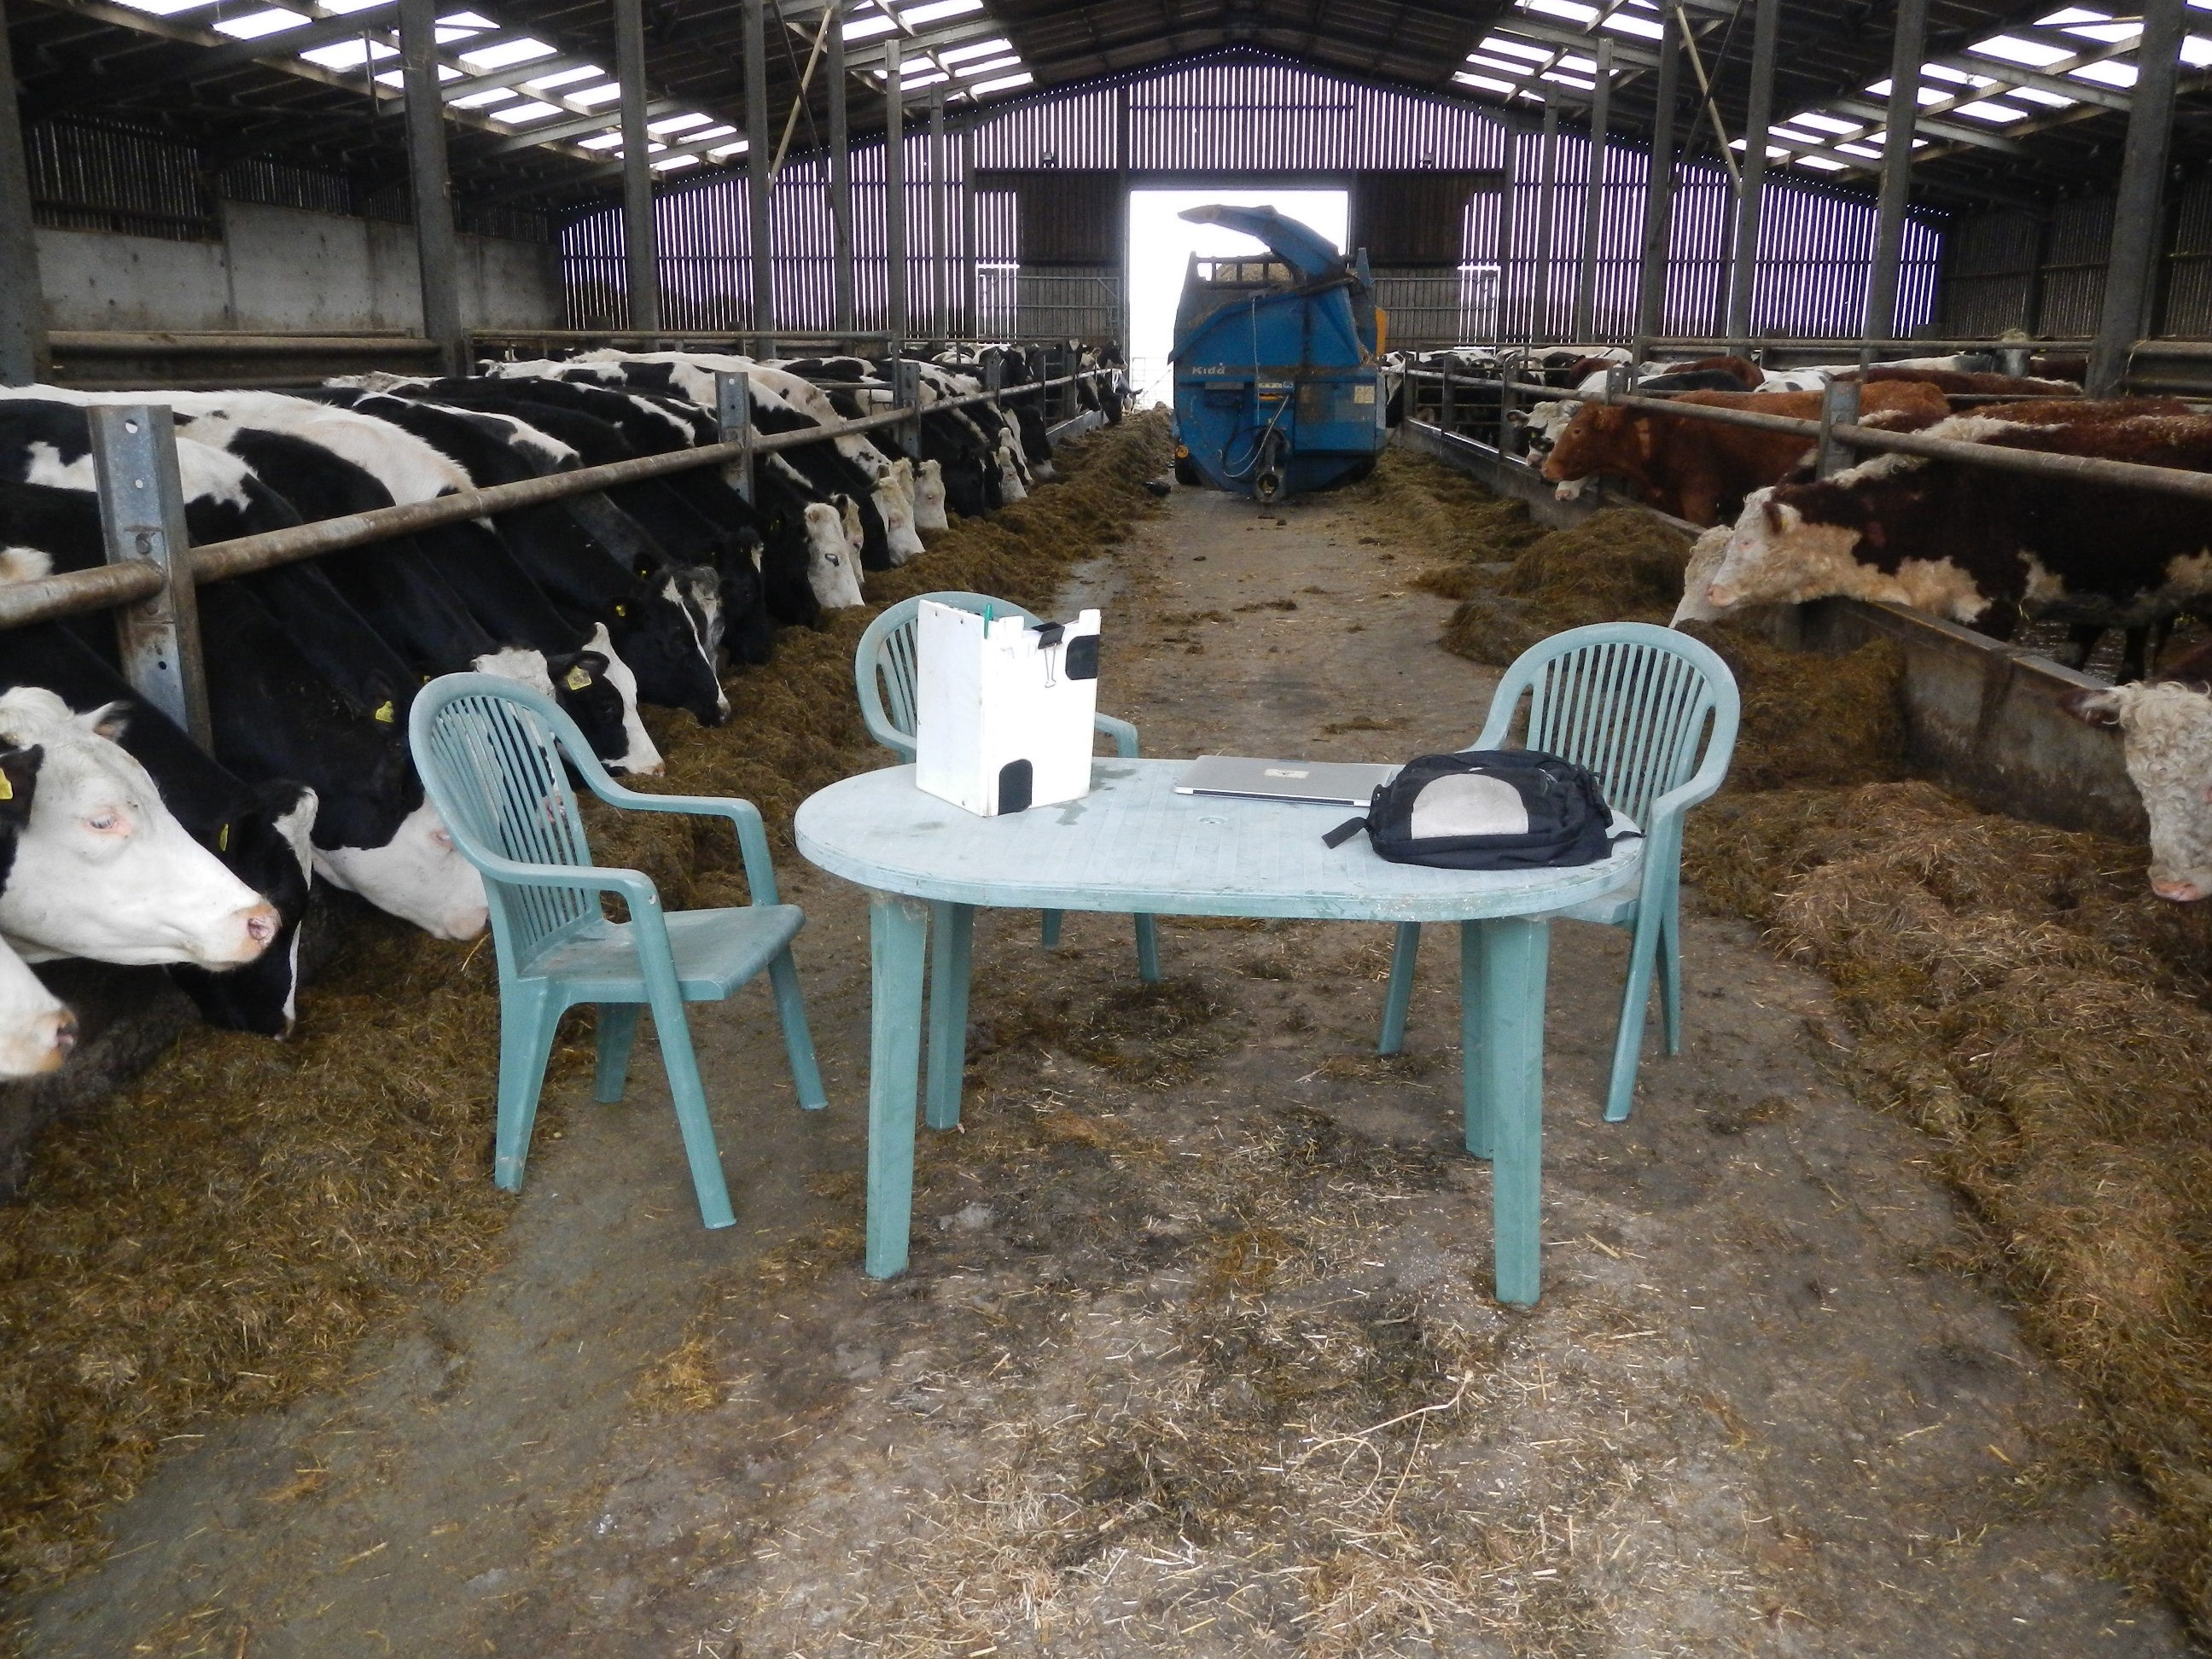 The ‘new normal’ farm office and well-ventilated meeting room.  The challenge is to get the chairs two metres apart, and out of licking range of the inquisitive cows.